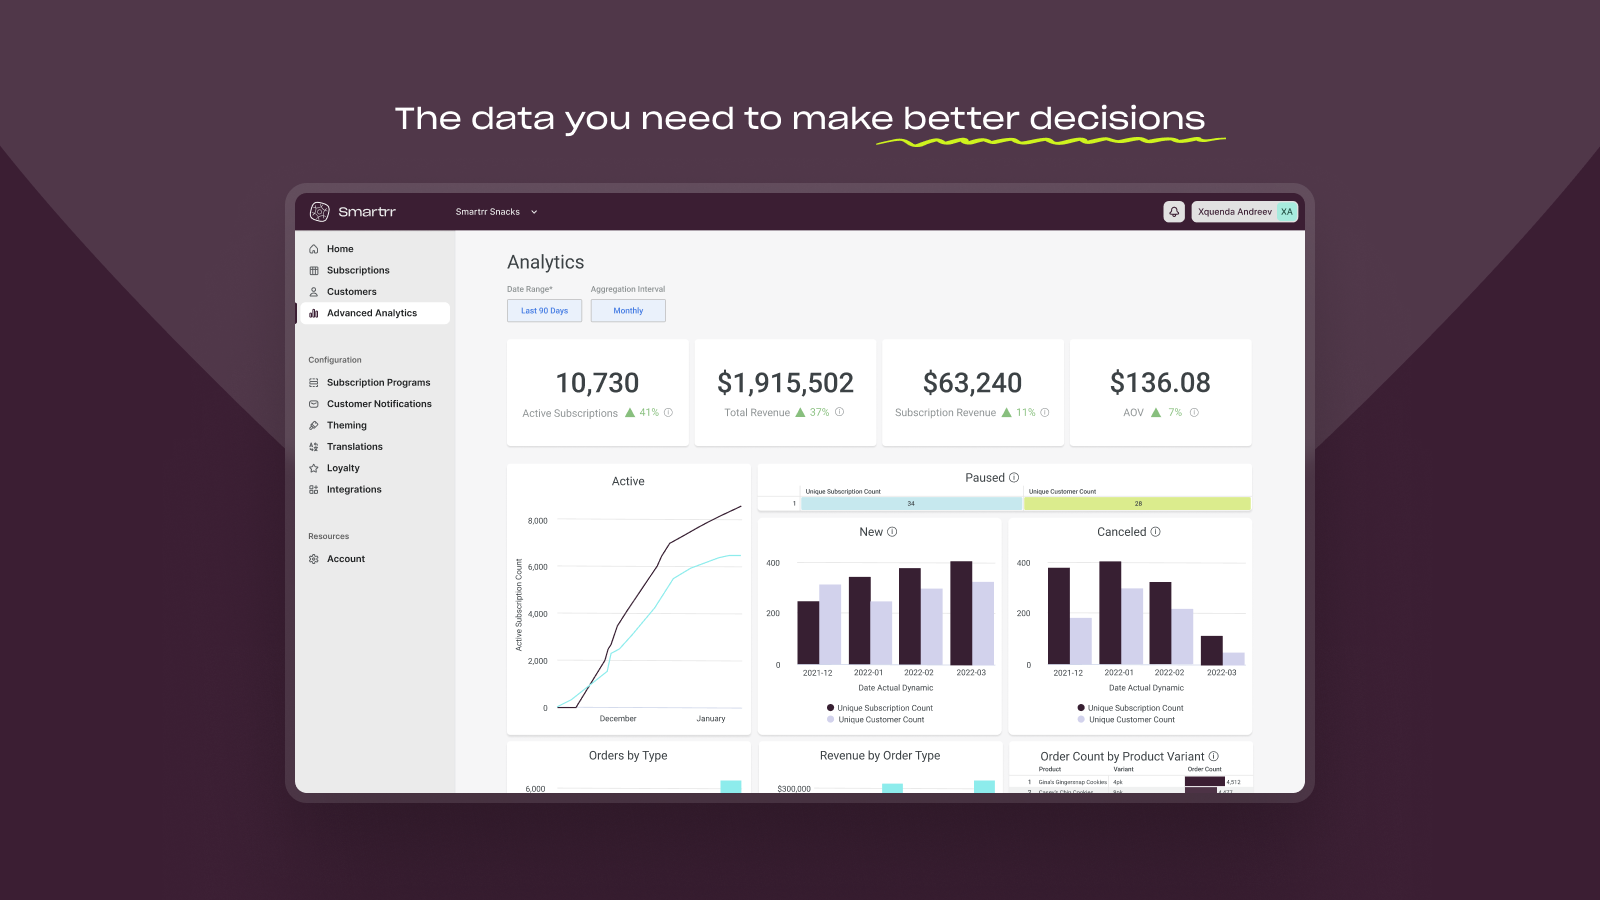 The data you need to make better decisions